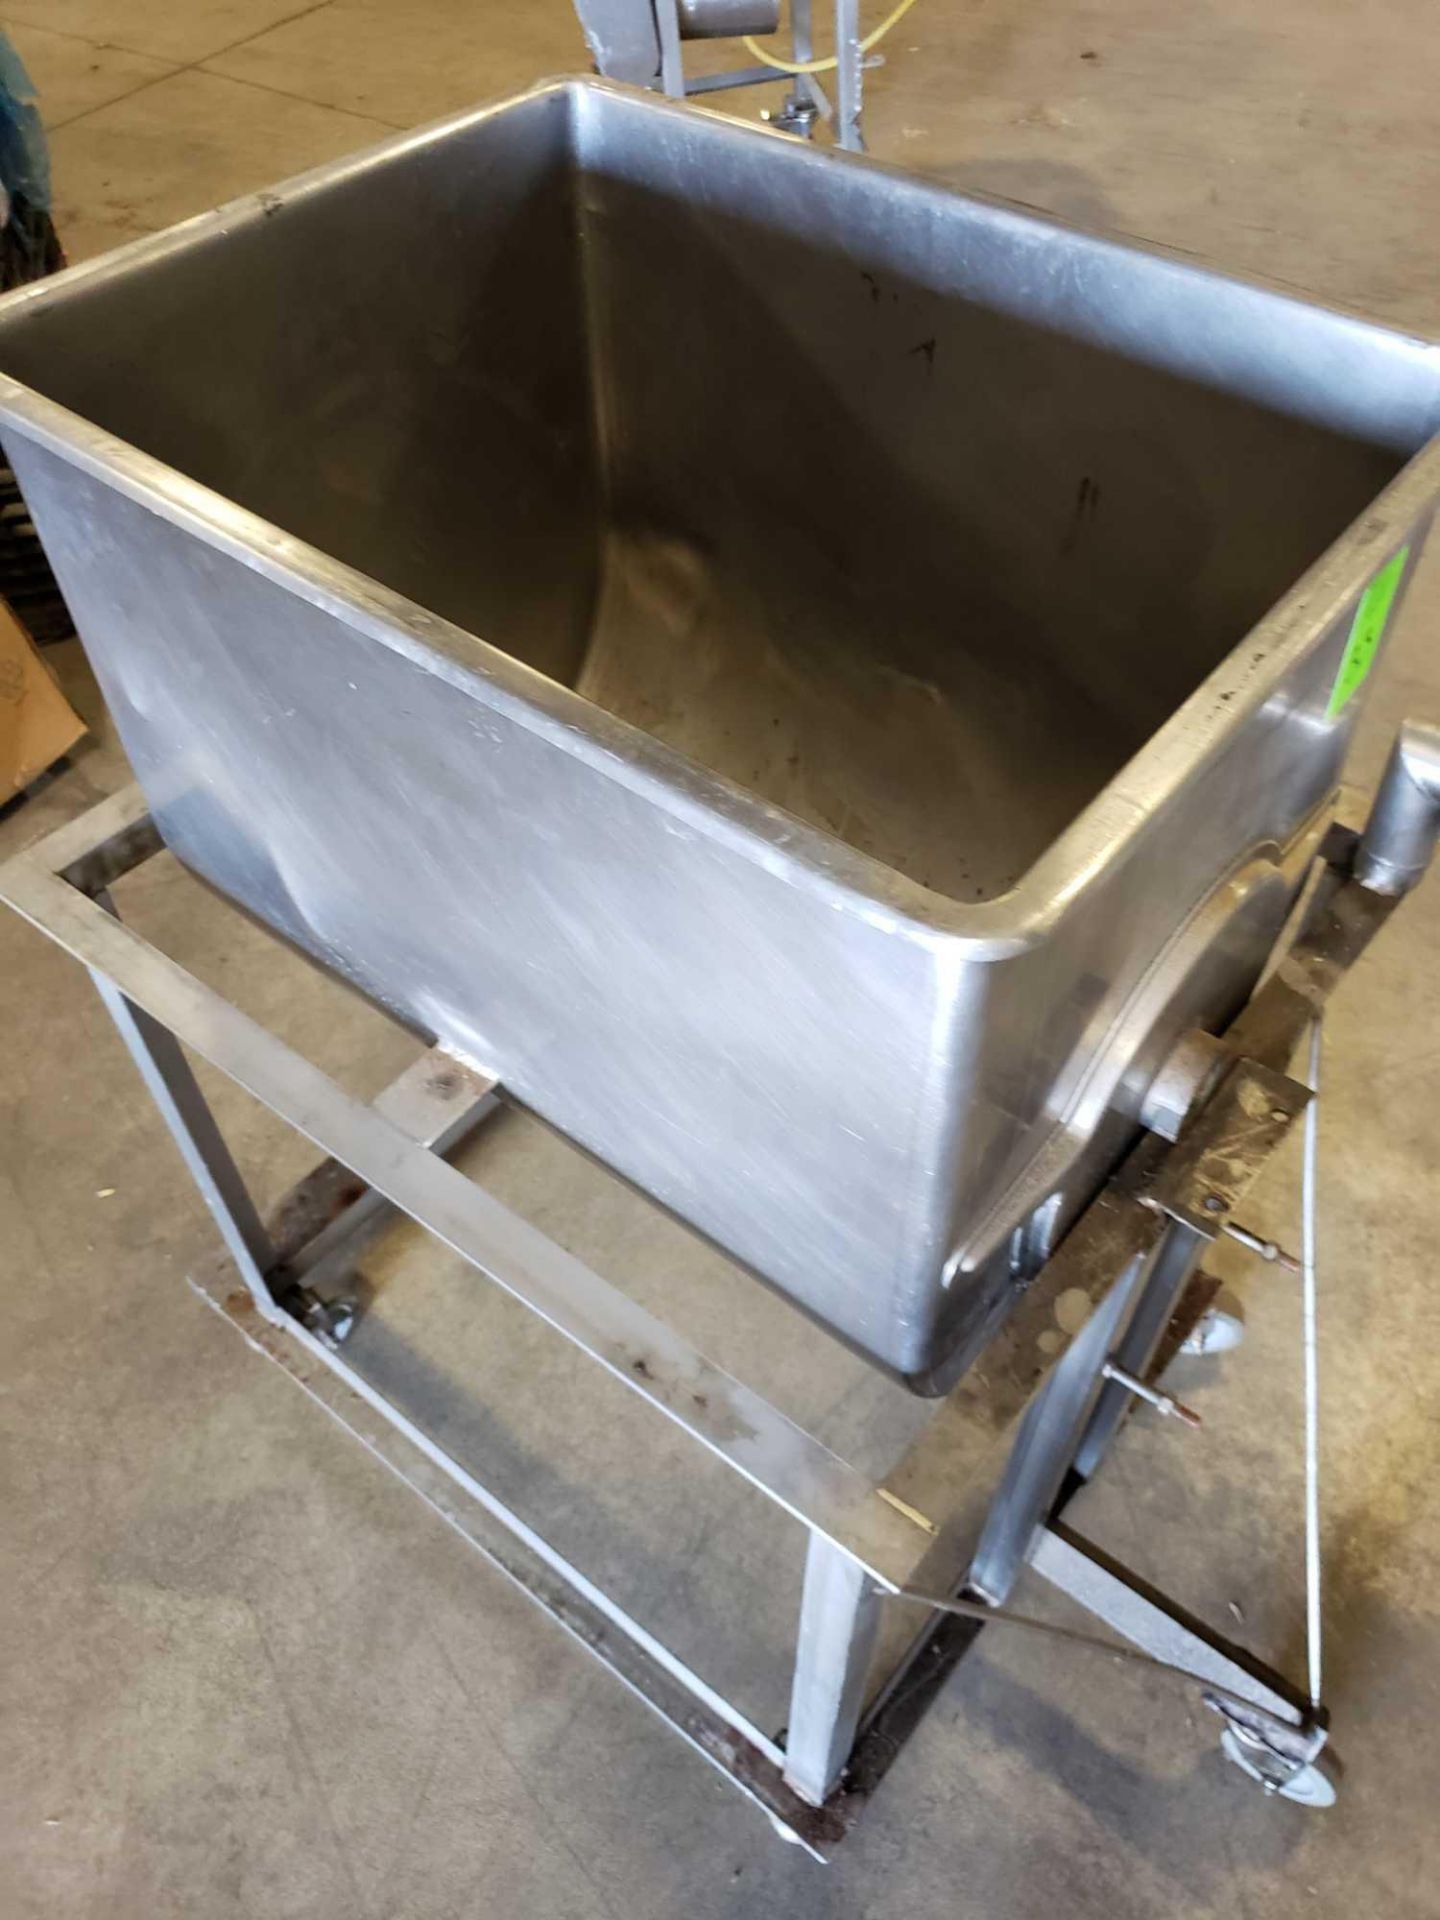 28"long x 21" wide x 23" deep Dumping stainless steal tank/hopper on cart with drain as pictured. - Image 3 of 5